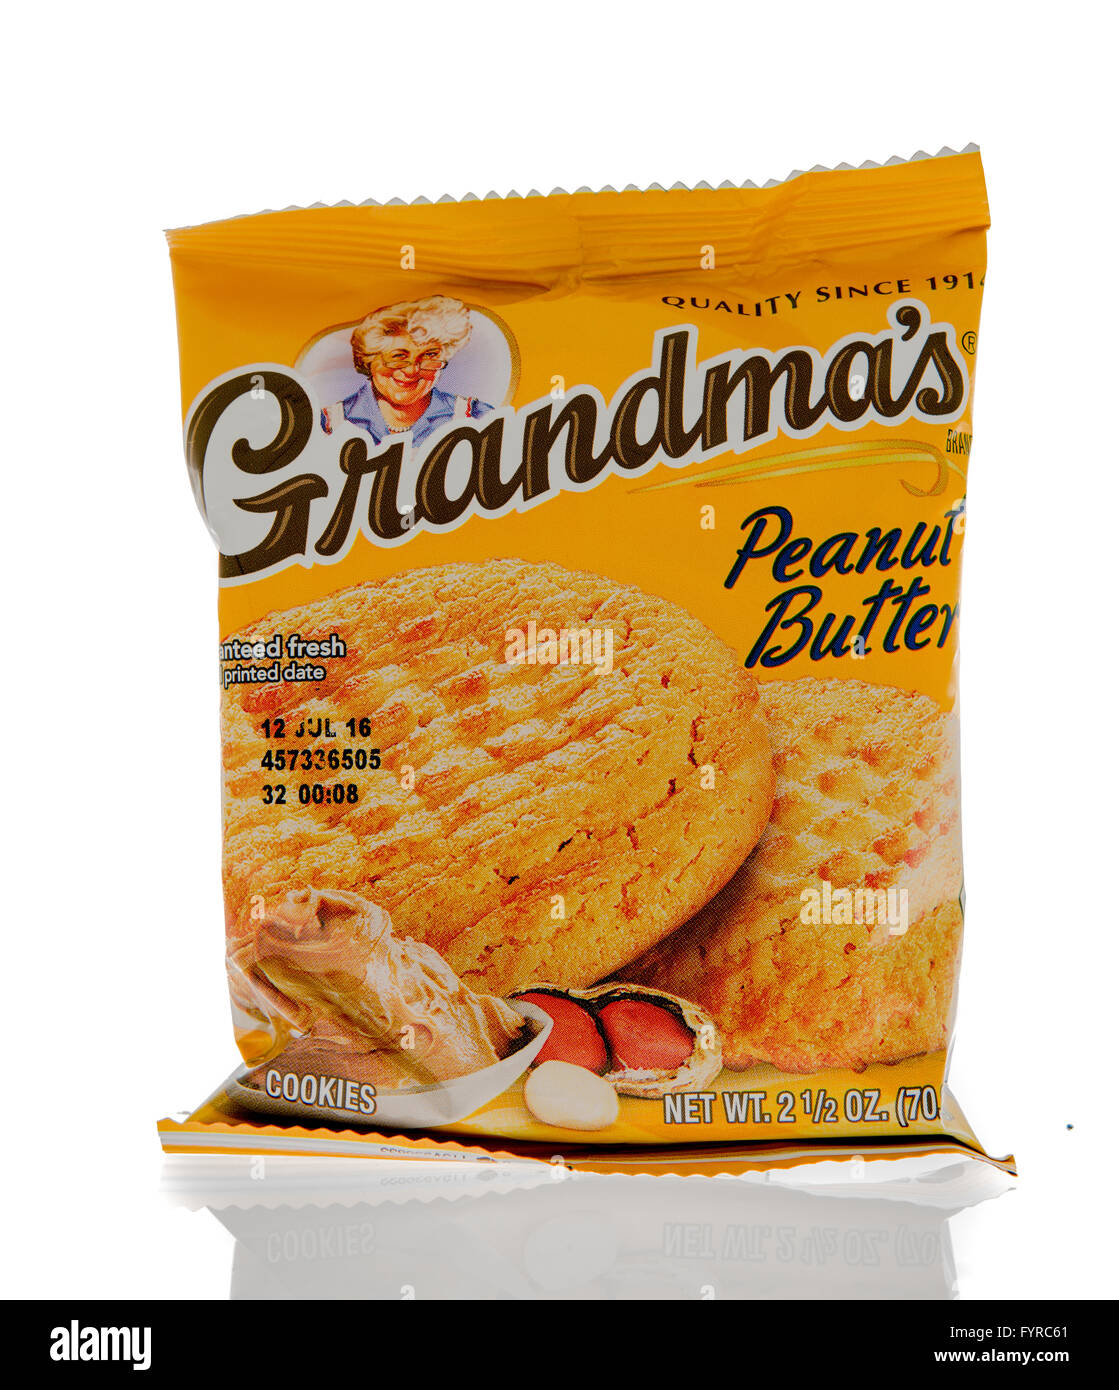 Winneconne, WI - 1 March 2016: A package of Grandma's cookies in peanut butter flavor Stock Photo